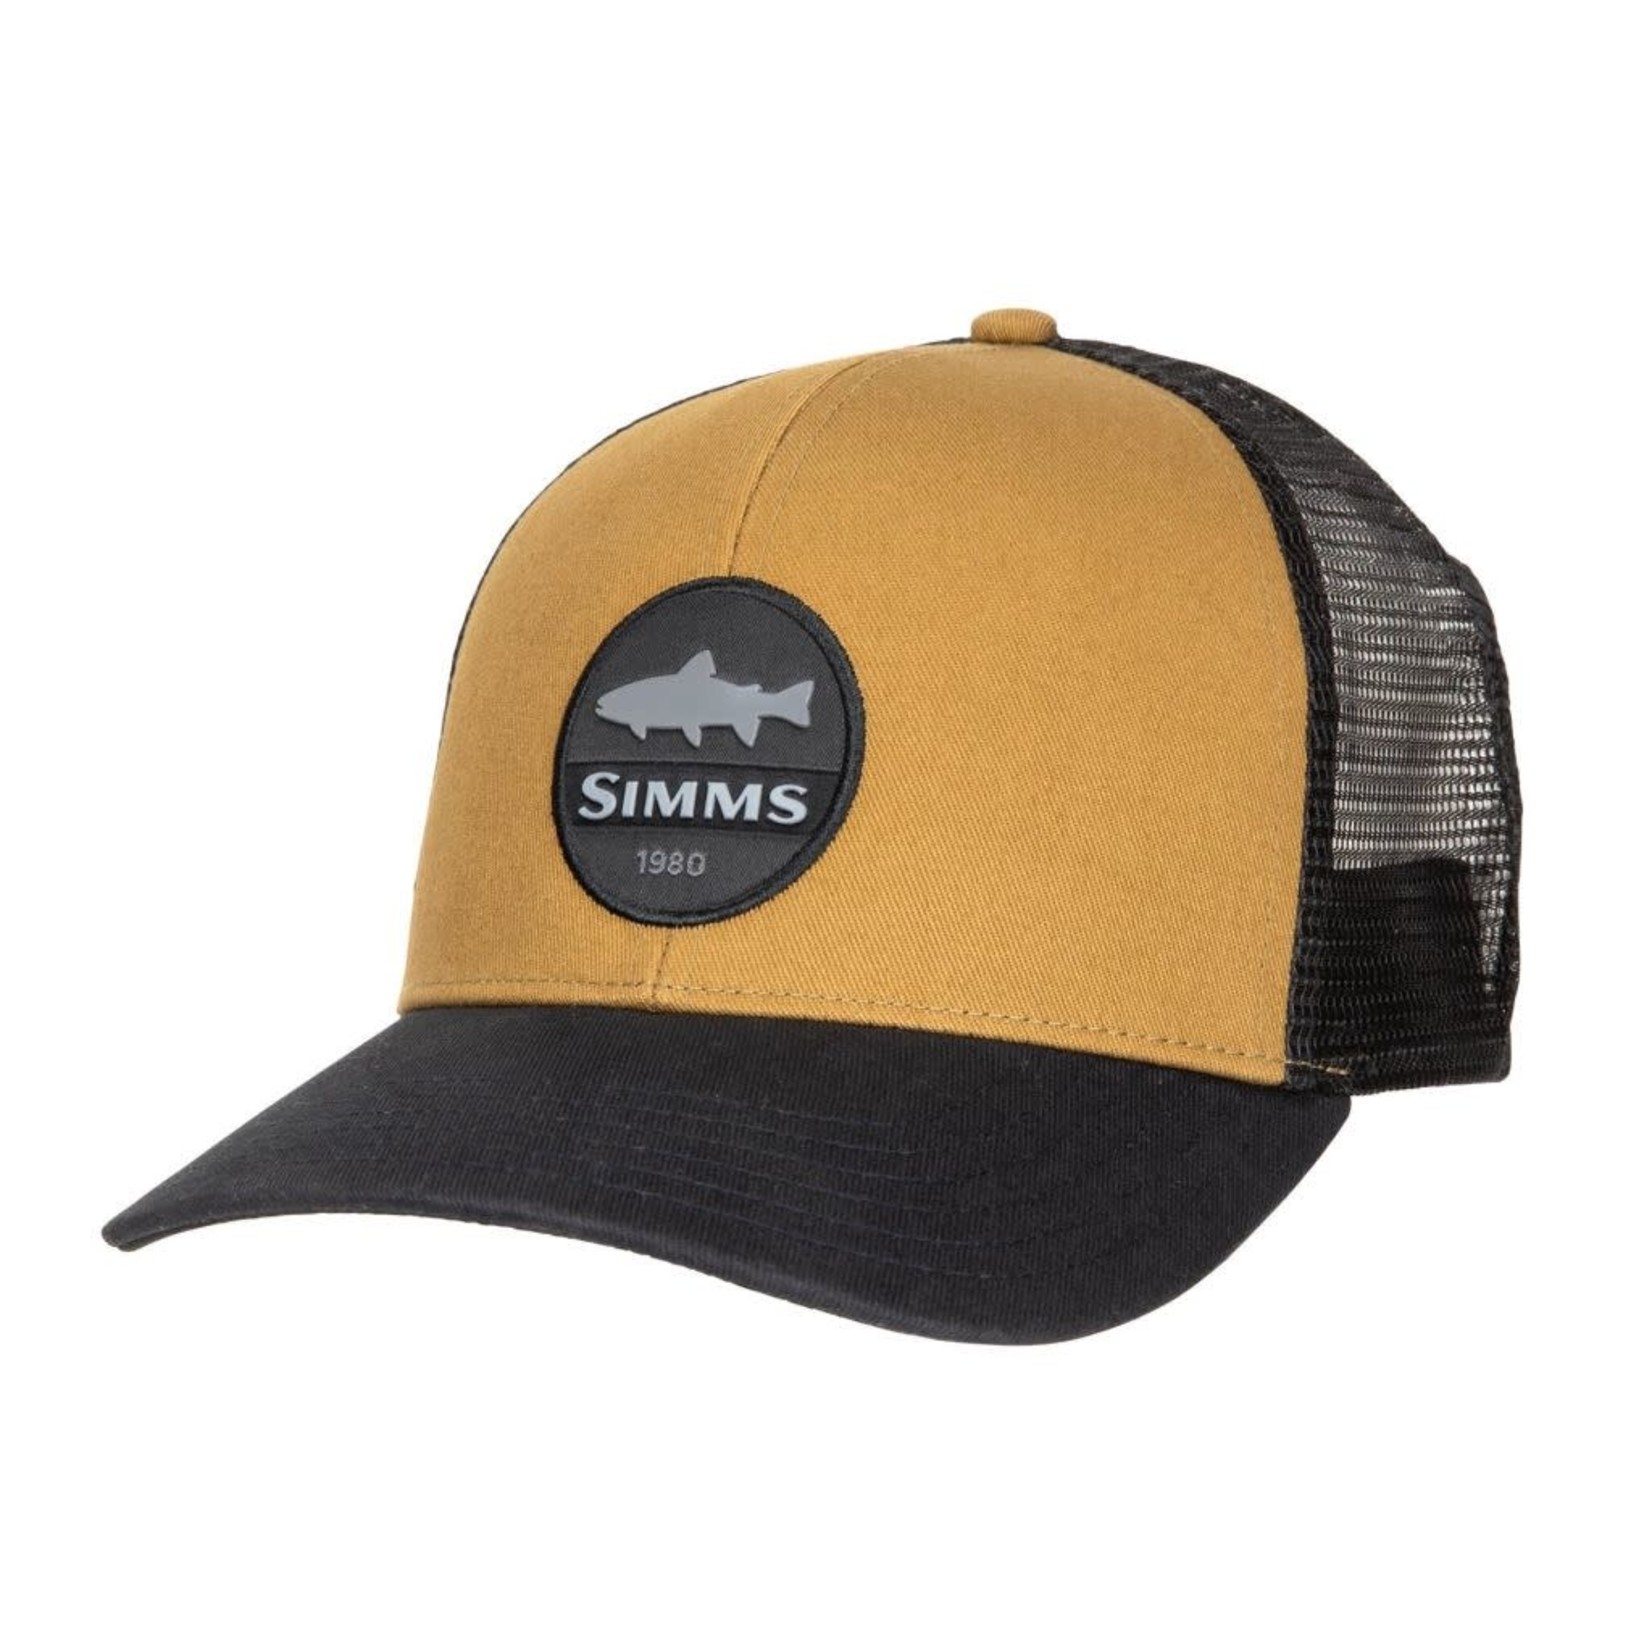 Simms Fishing Simms Trout Patch Trucker Dark Bronze One Size